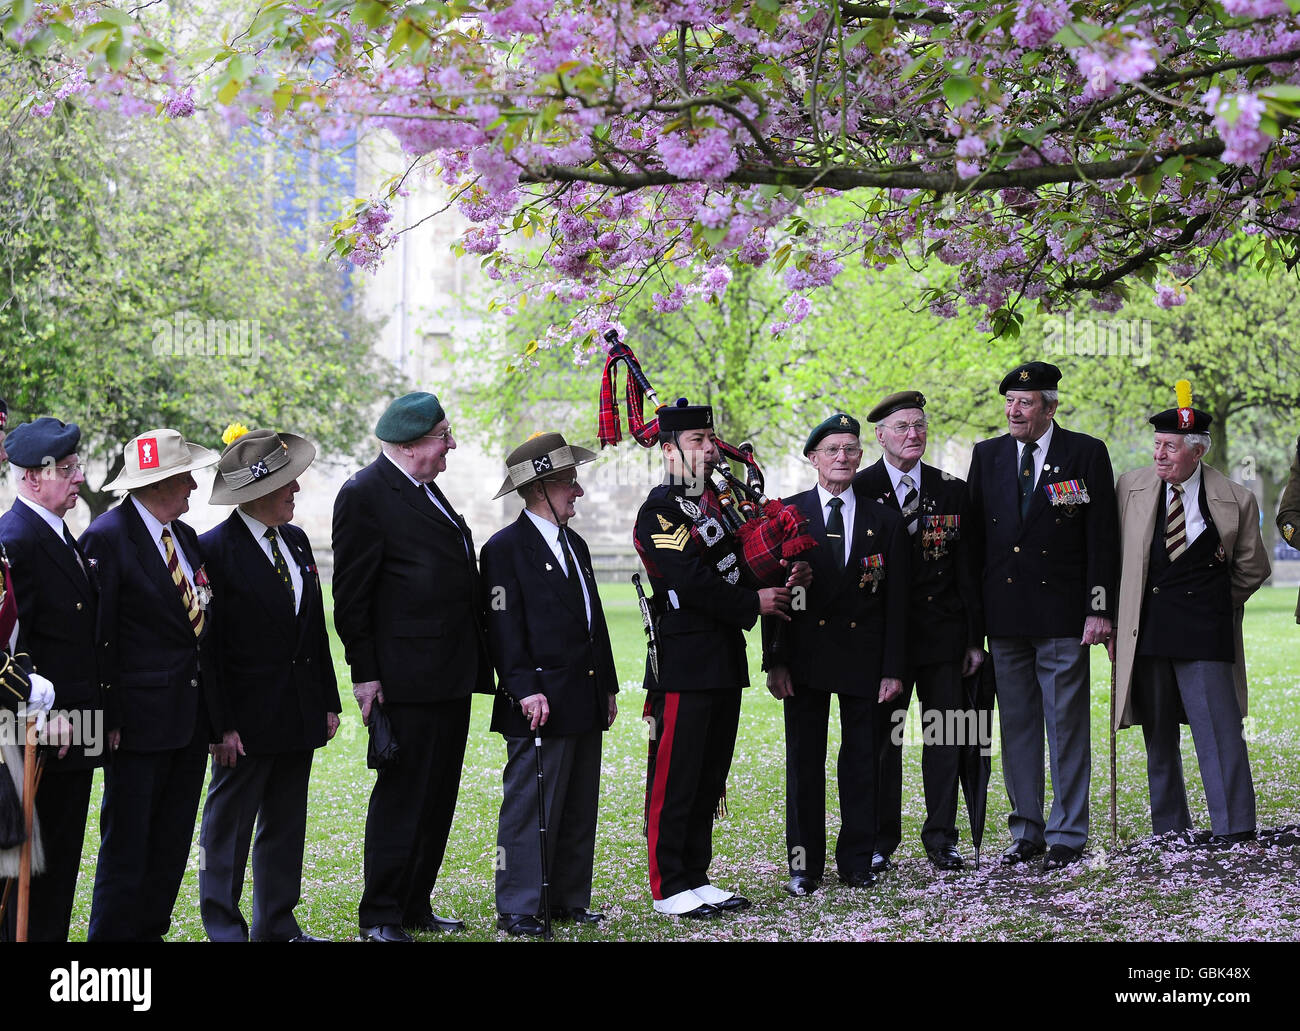 Veterans of the Battle of Kohima remembered at the 65th anniversary of the battle, with a service at York Minster and wreath laying at the Kohima Memorial in the Minster Gardens. Stock Photo